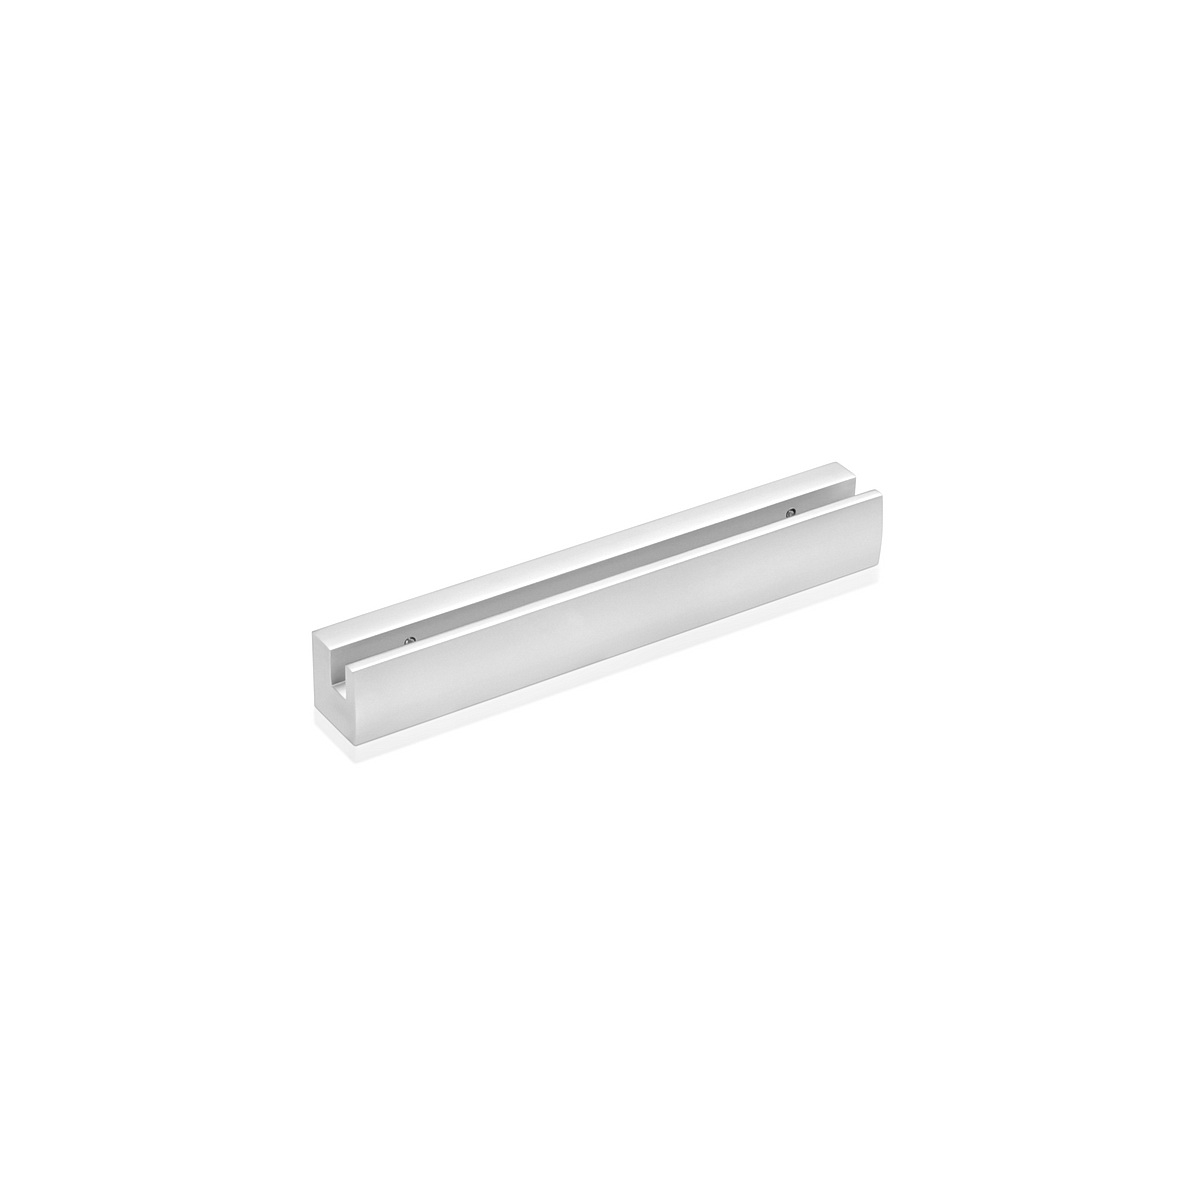 Sign Clamp in 7 1/16'' (180 mm) length  X 1'' (25.4 mm) wide - Satin